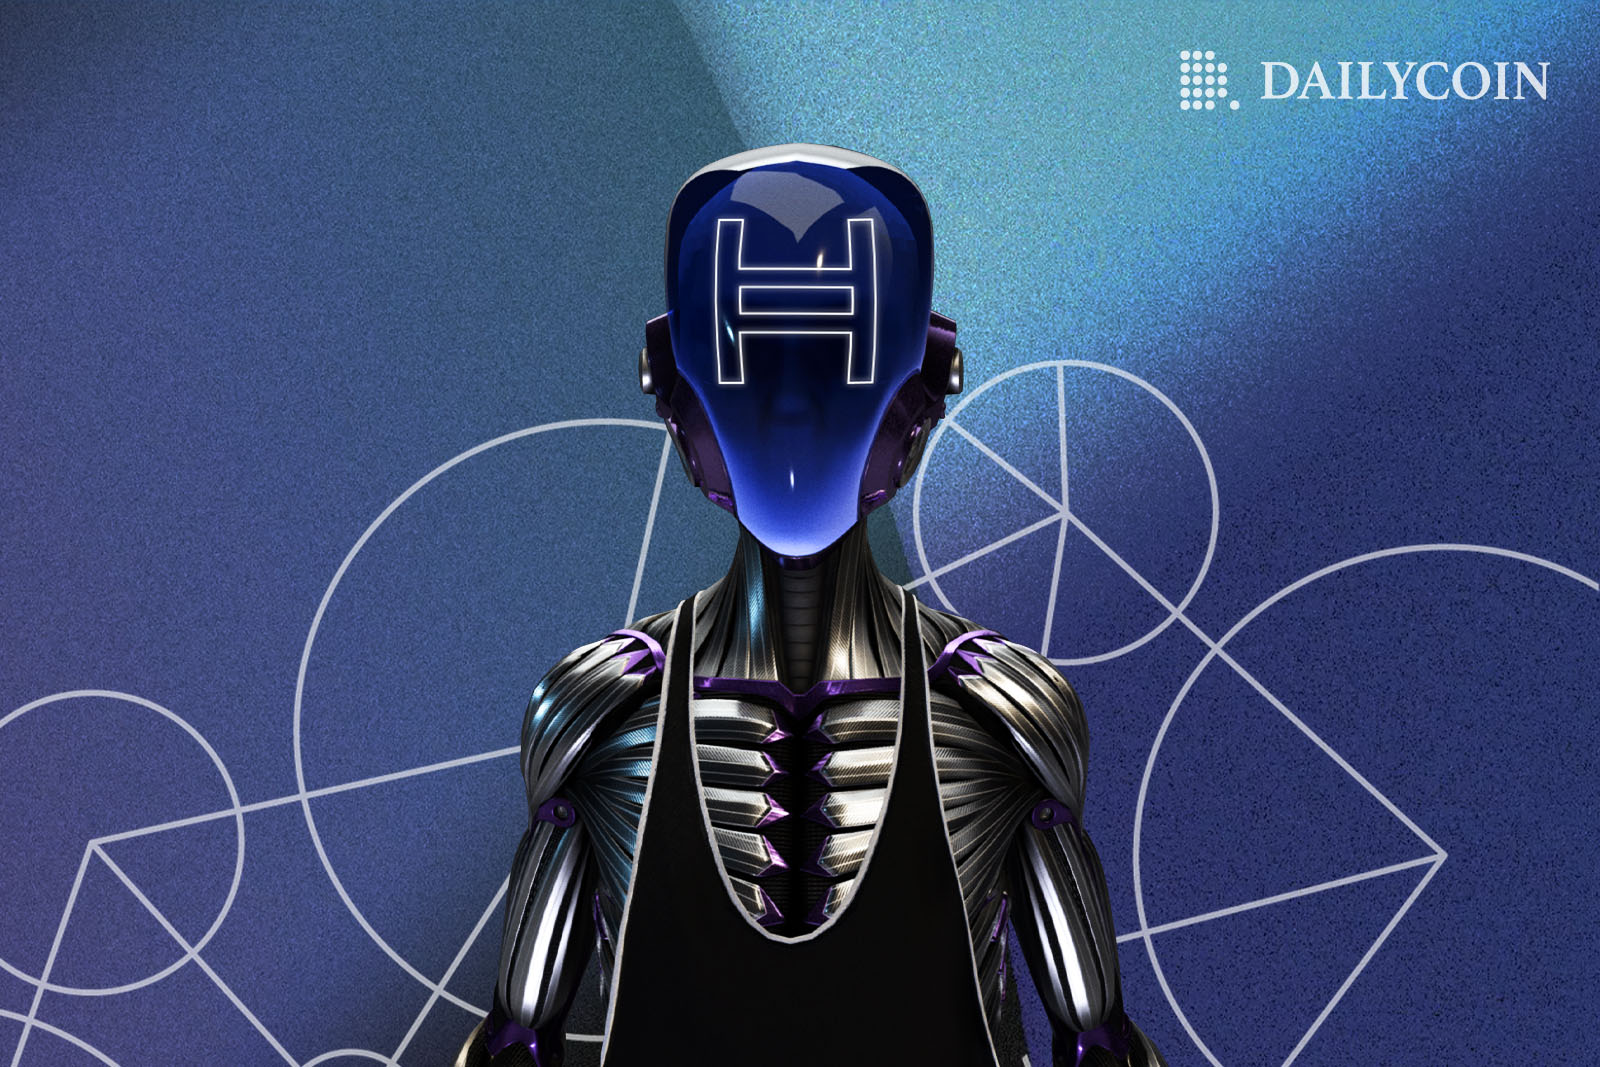 A metal robot with Hedera facemask standing in front of a blue background with circles.